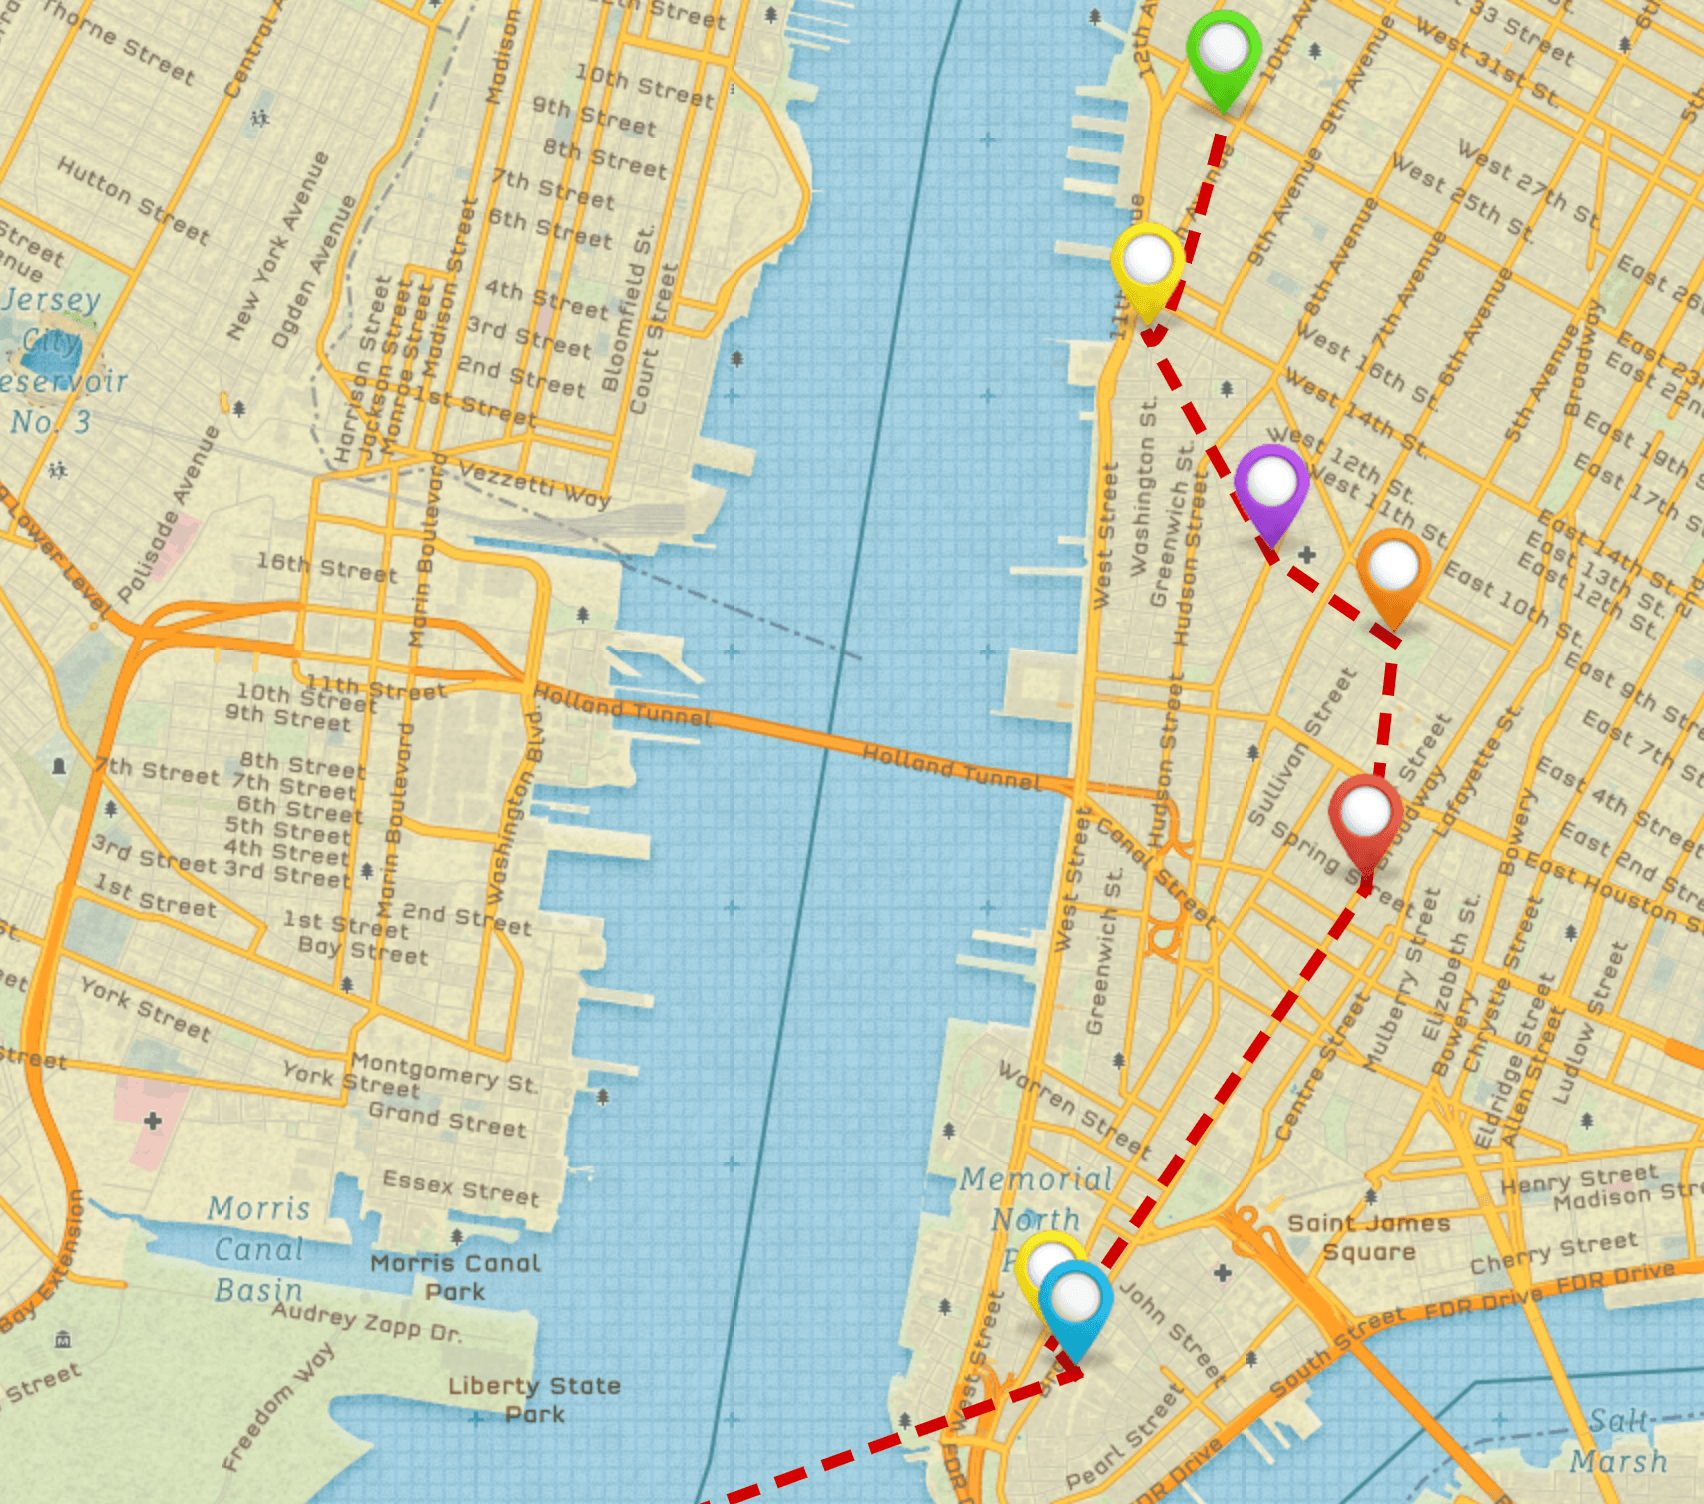 Four Days in New York: Day 1 Route